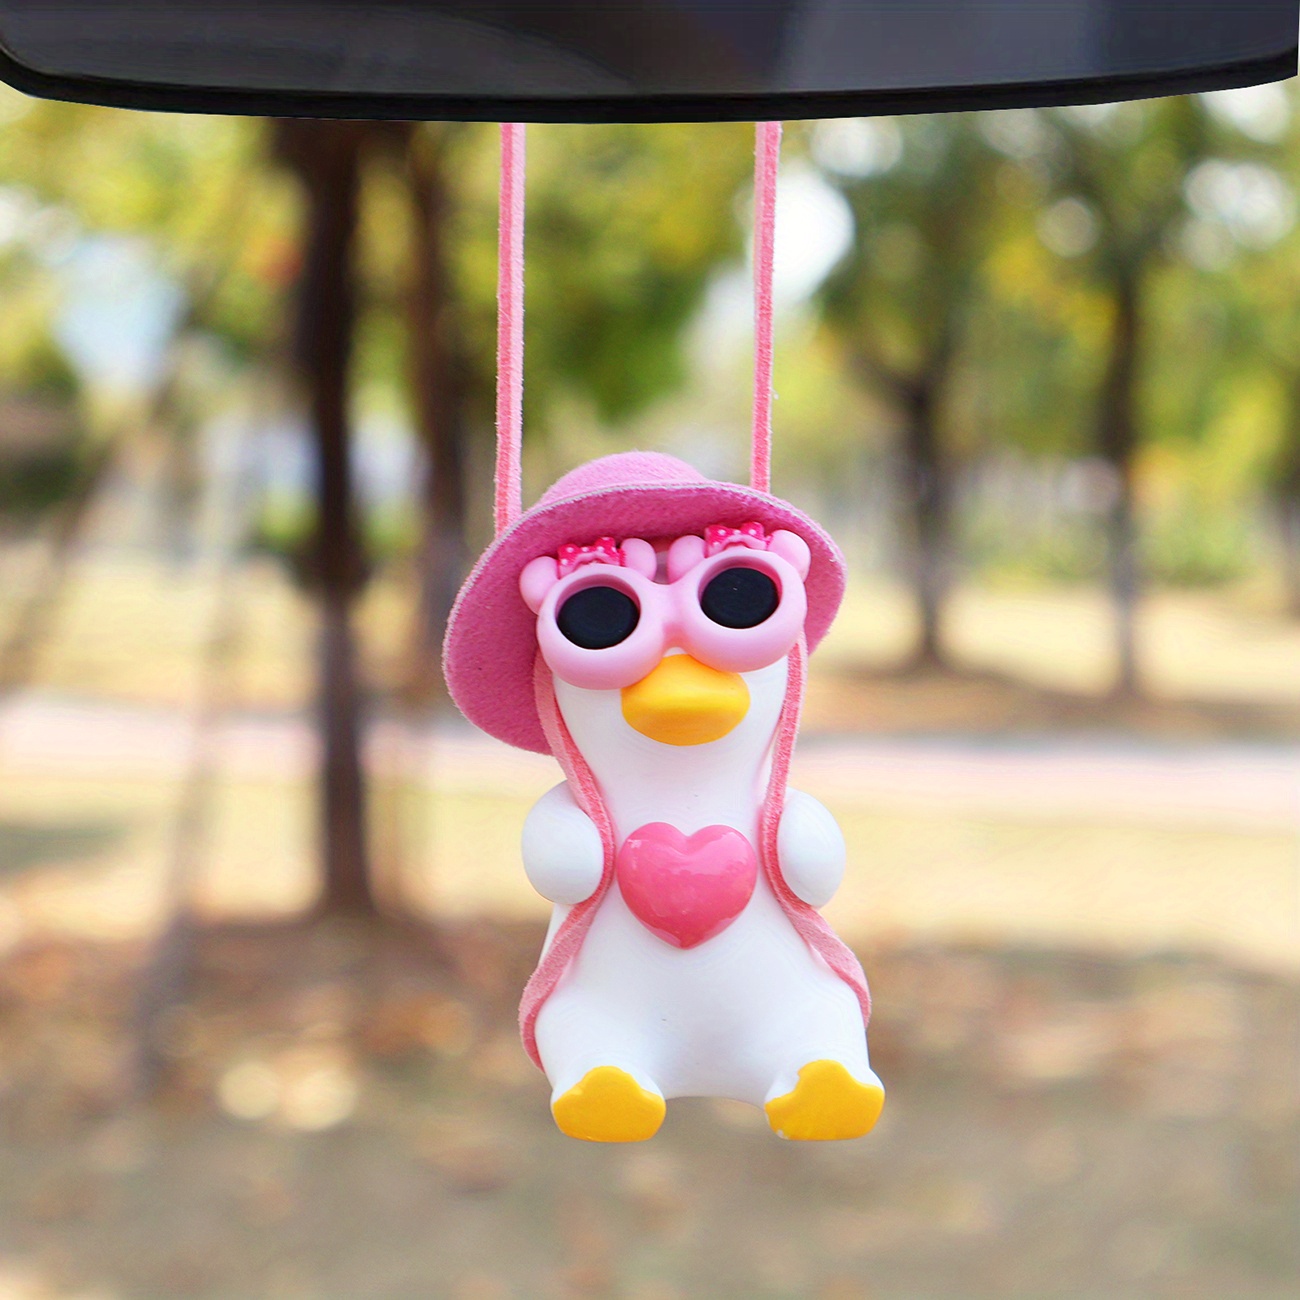 2.6*1.8*2 Inch/ Approx 6.5*4.5*5cm Cute Swinging Duck Car Ornament Swing  Duck Car Decoration Women – the best products in the Joom Geek online store